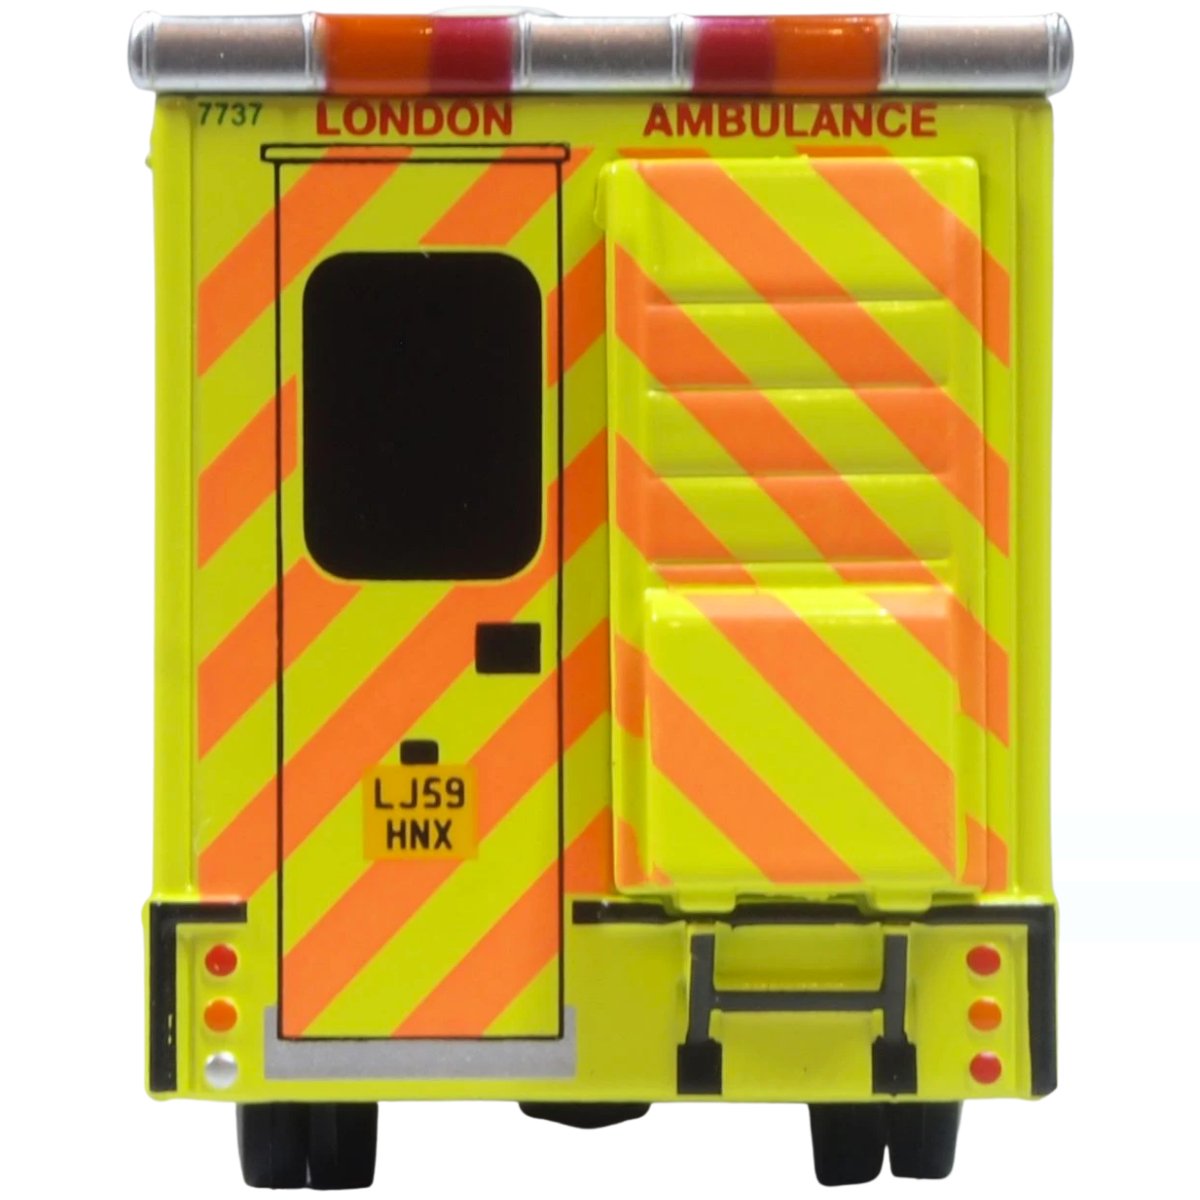 Oxford Diecast 76MA007 Mercedes Ambulance London Remembrance Day - Phillips Hobbies